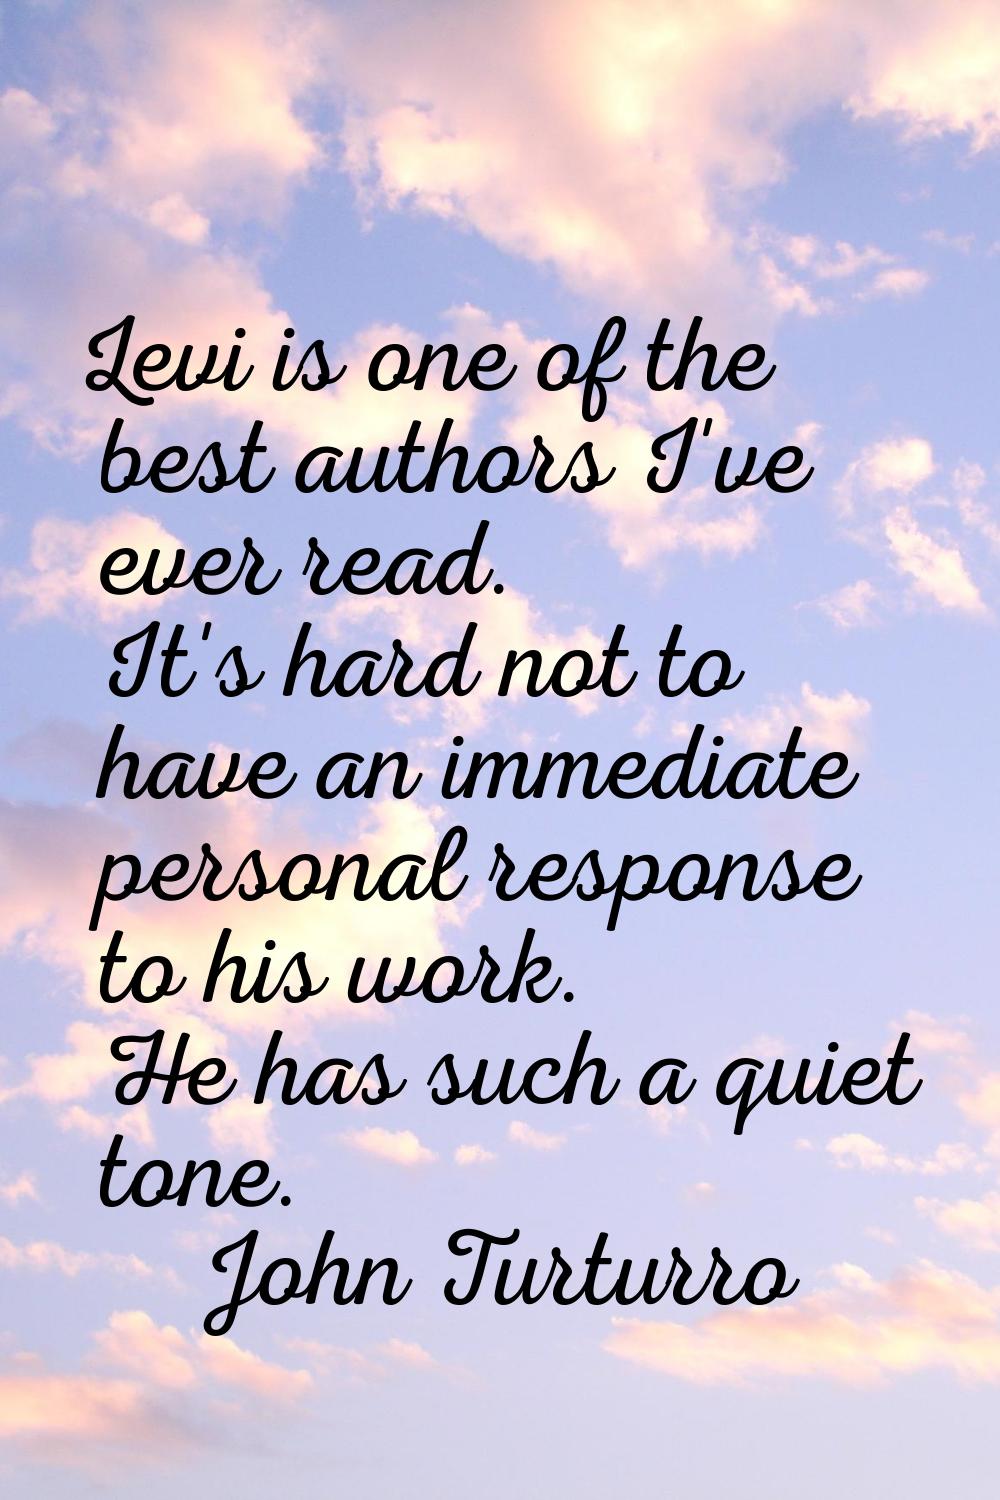 Levi is one of the best authors I've ever read. It's hard not to have an immediate personal respons